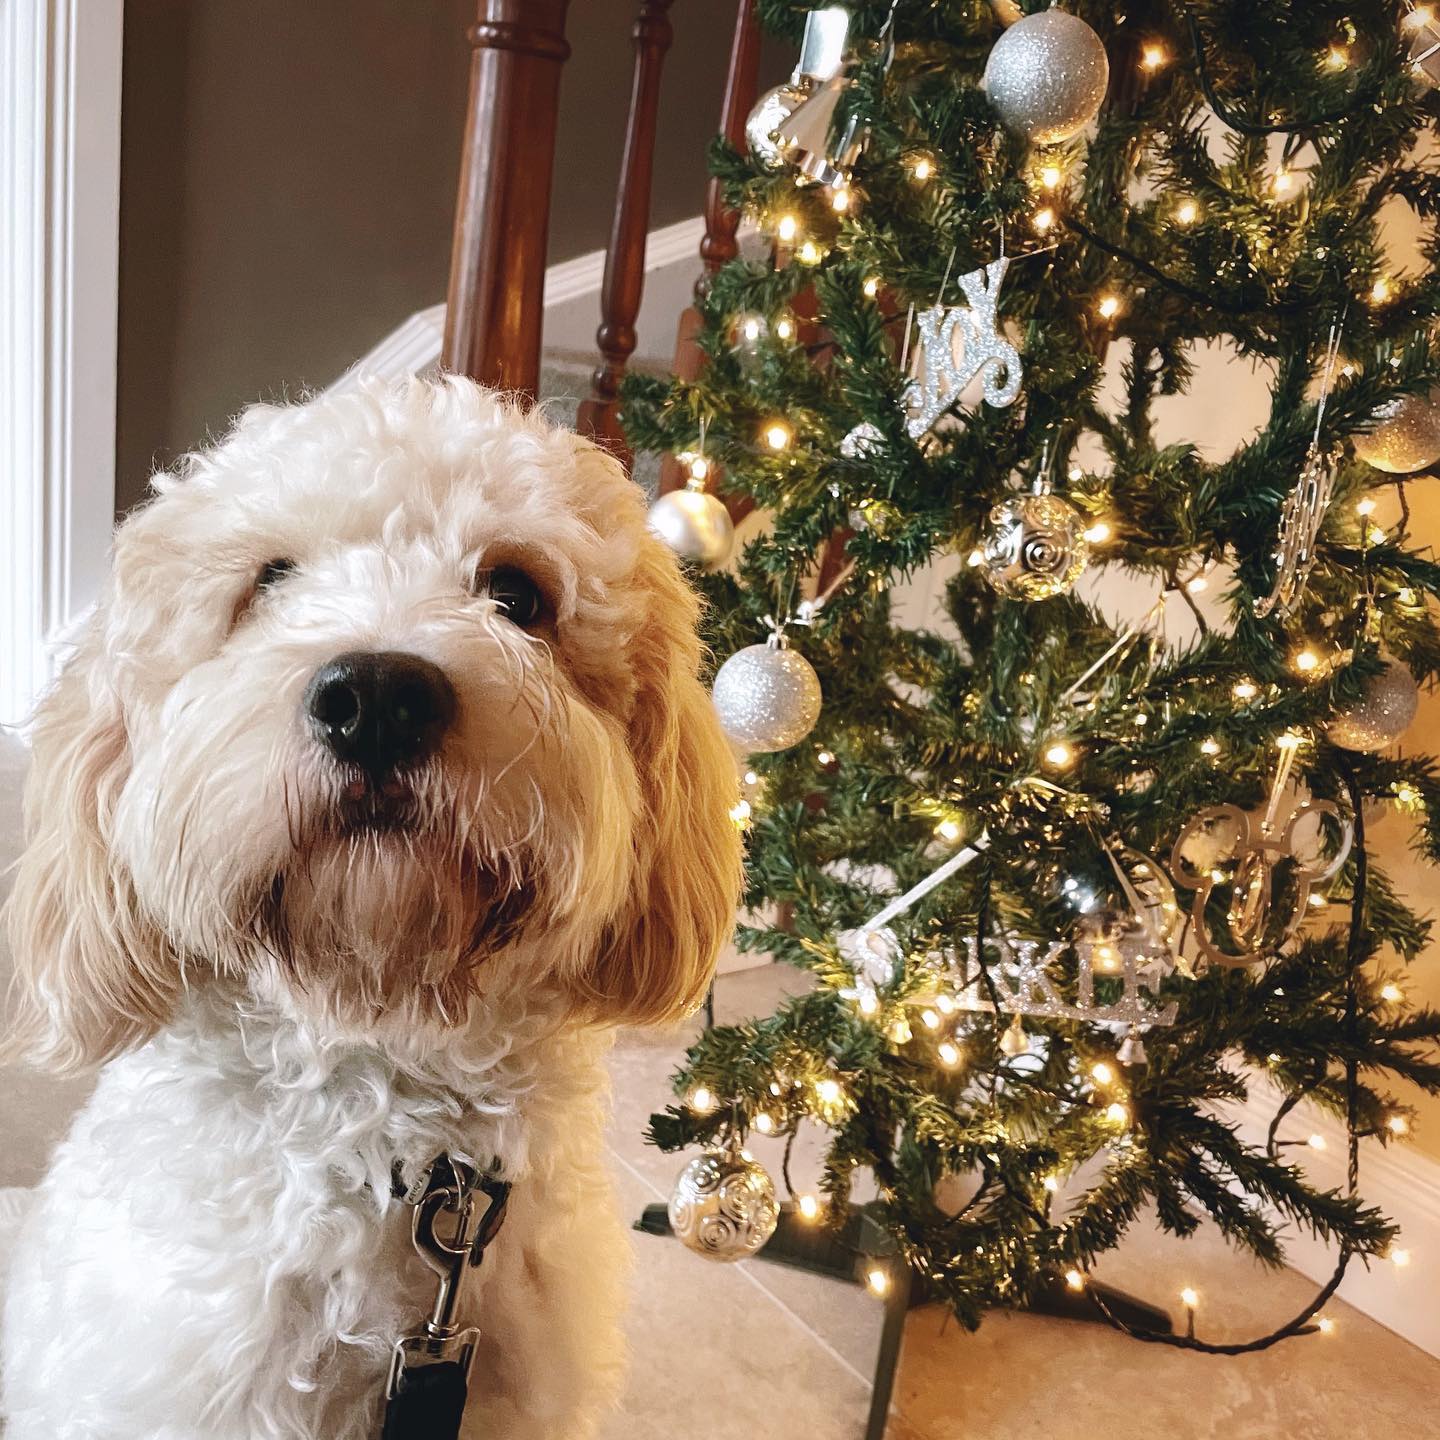 On the 13th of December…. Alfie and the Christmas treeIf you had told me a year ago I would have a puppy to sit (momentarily!) beside our Christmas tree I definitely wouldn't have believed you!